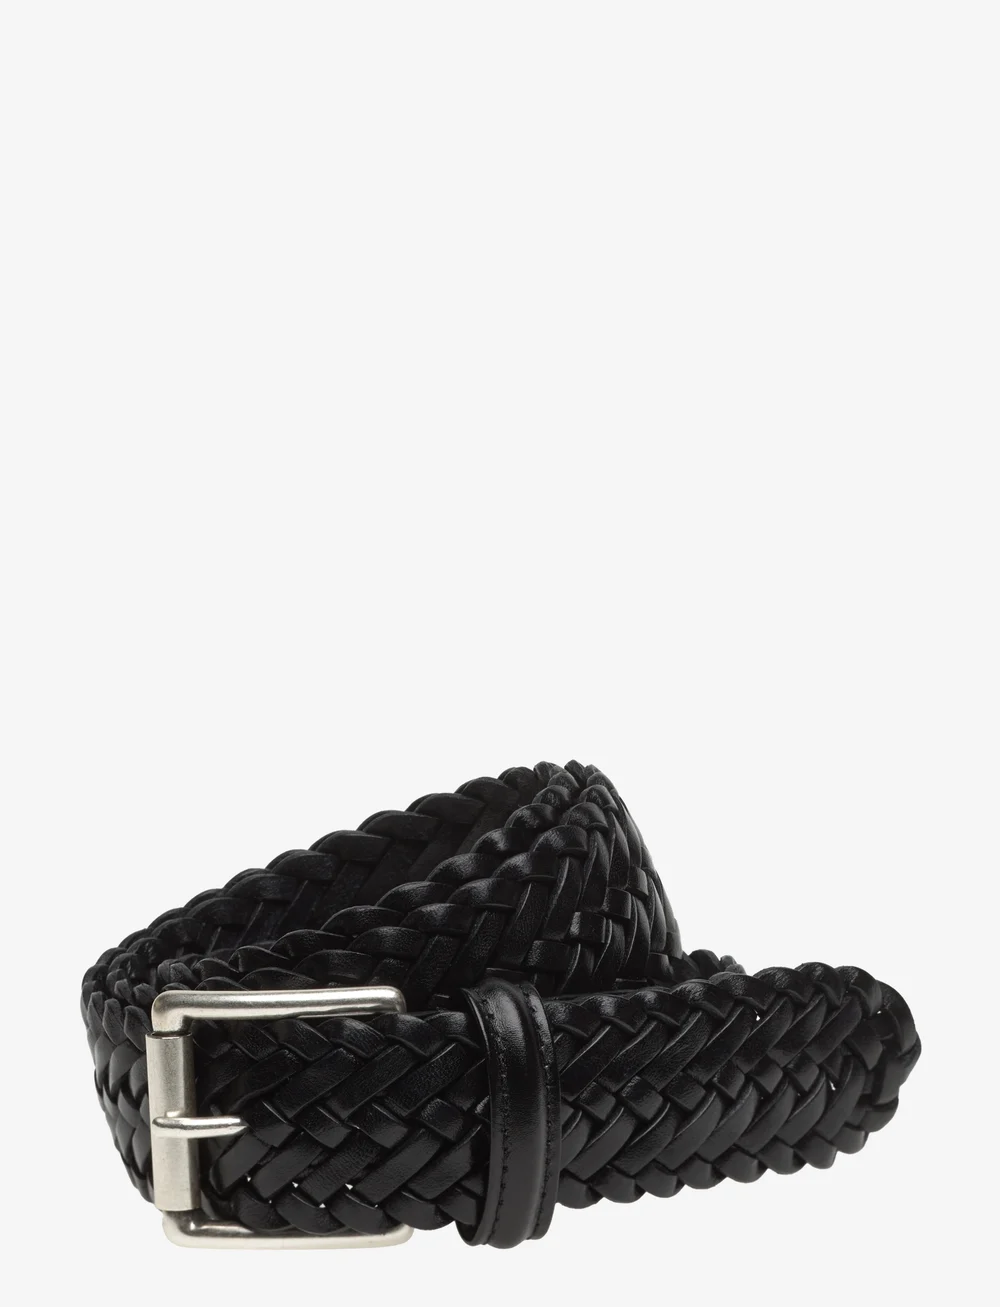 Anderson's Classic Black Woven Leather Belt - Braided belts 